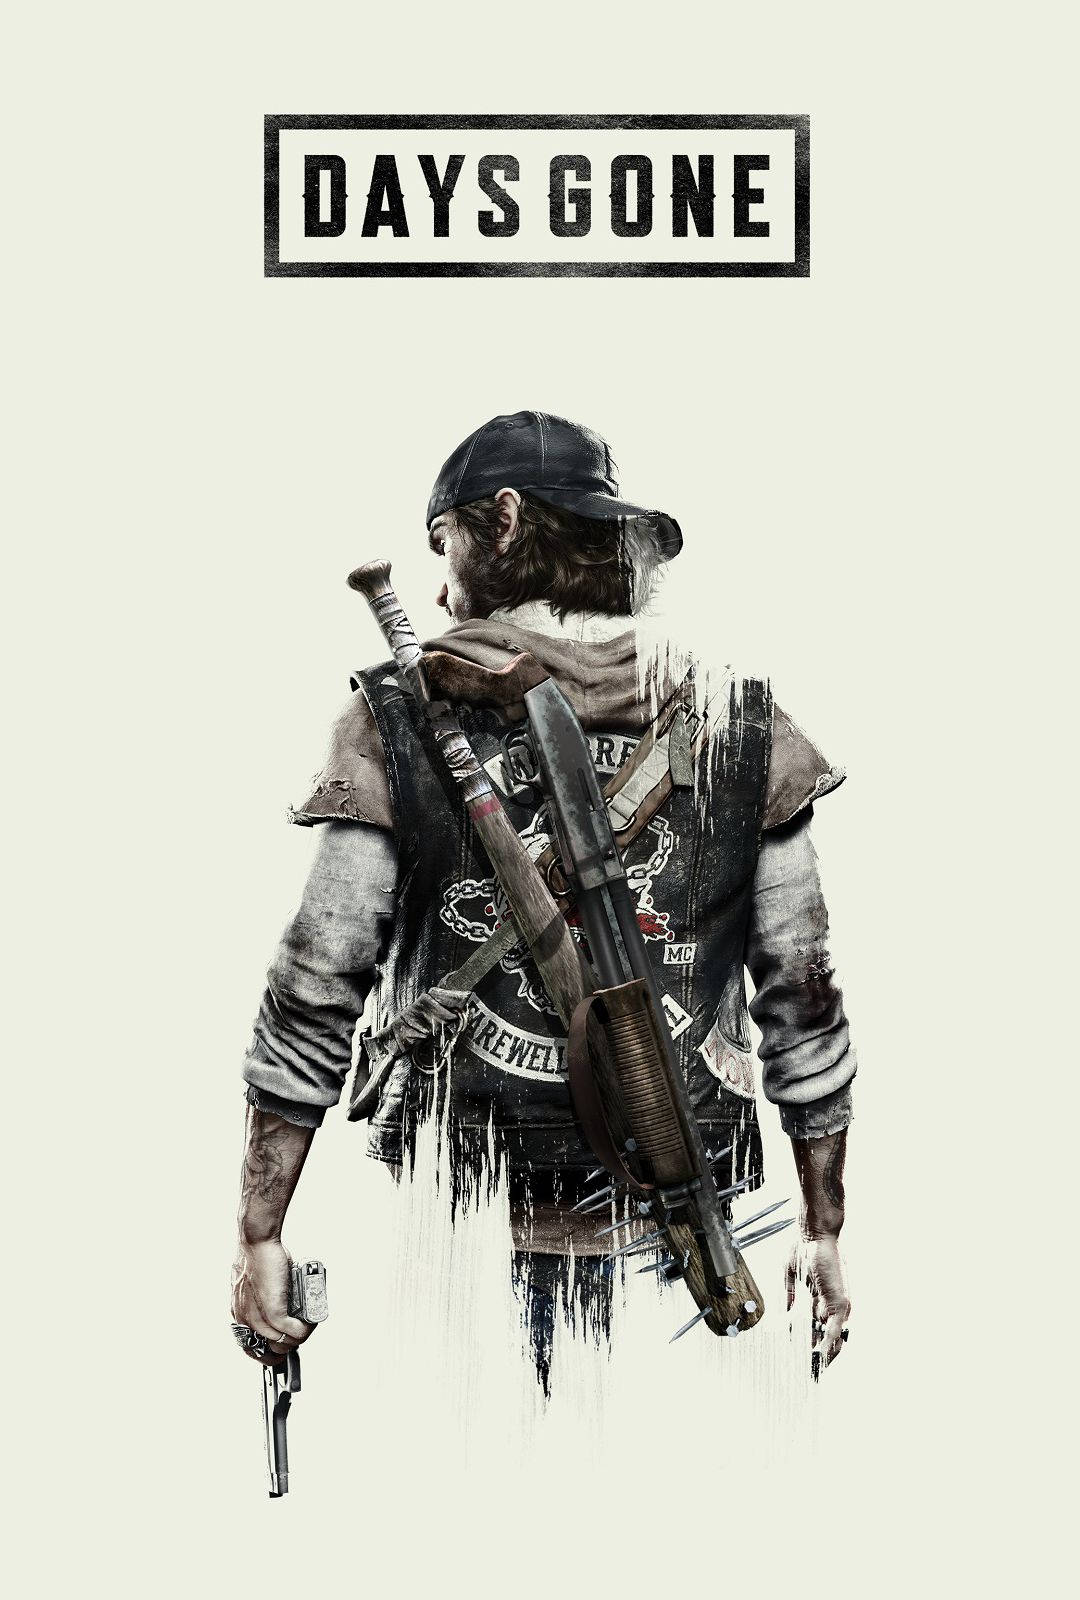 Days Gone Deacon Poster Background